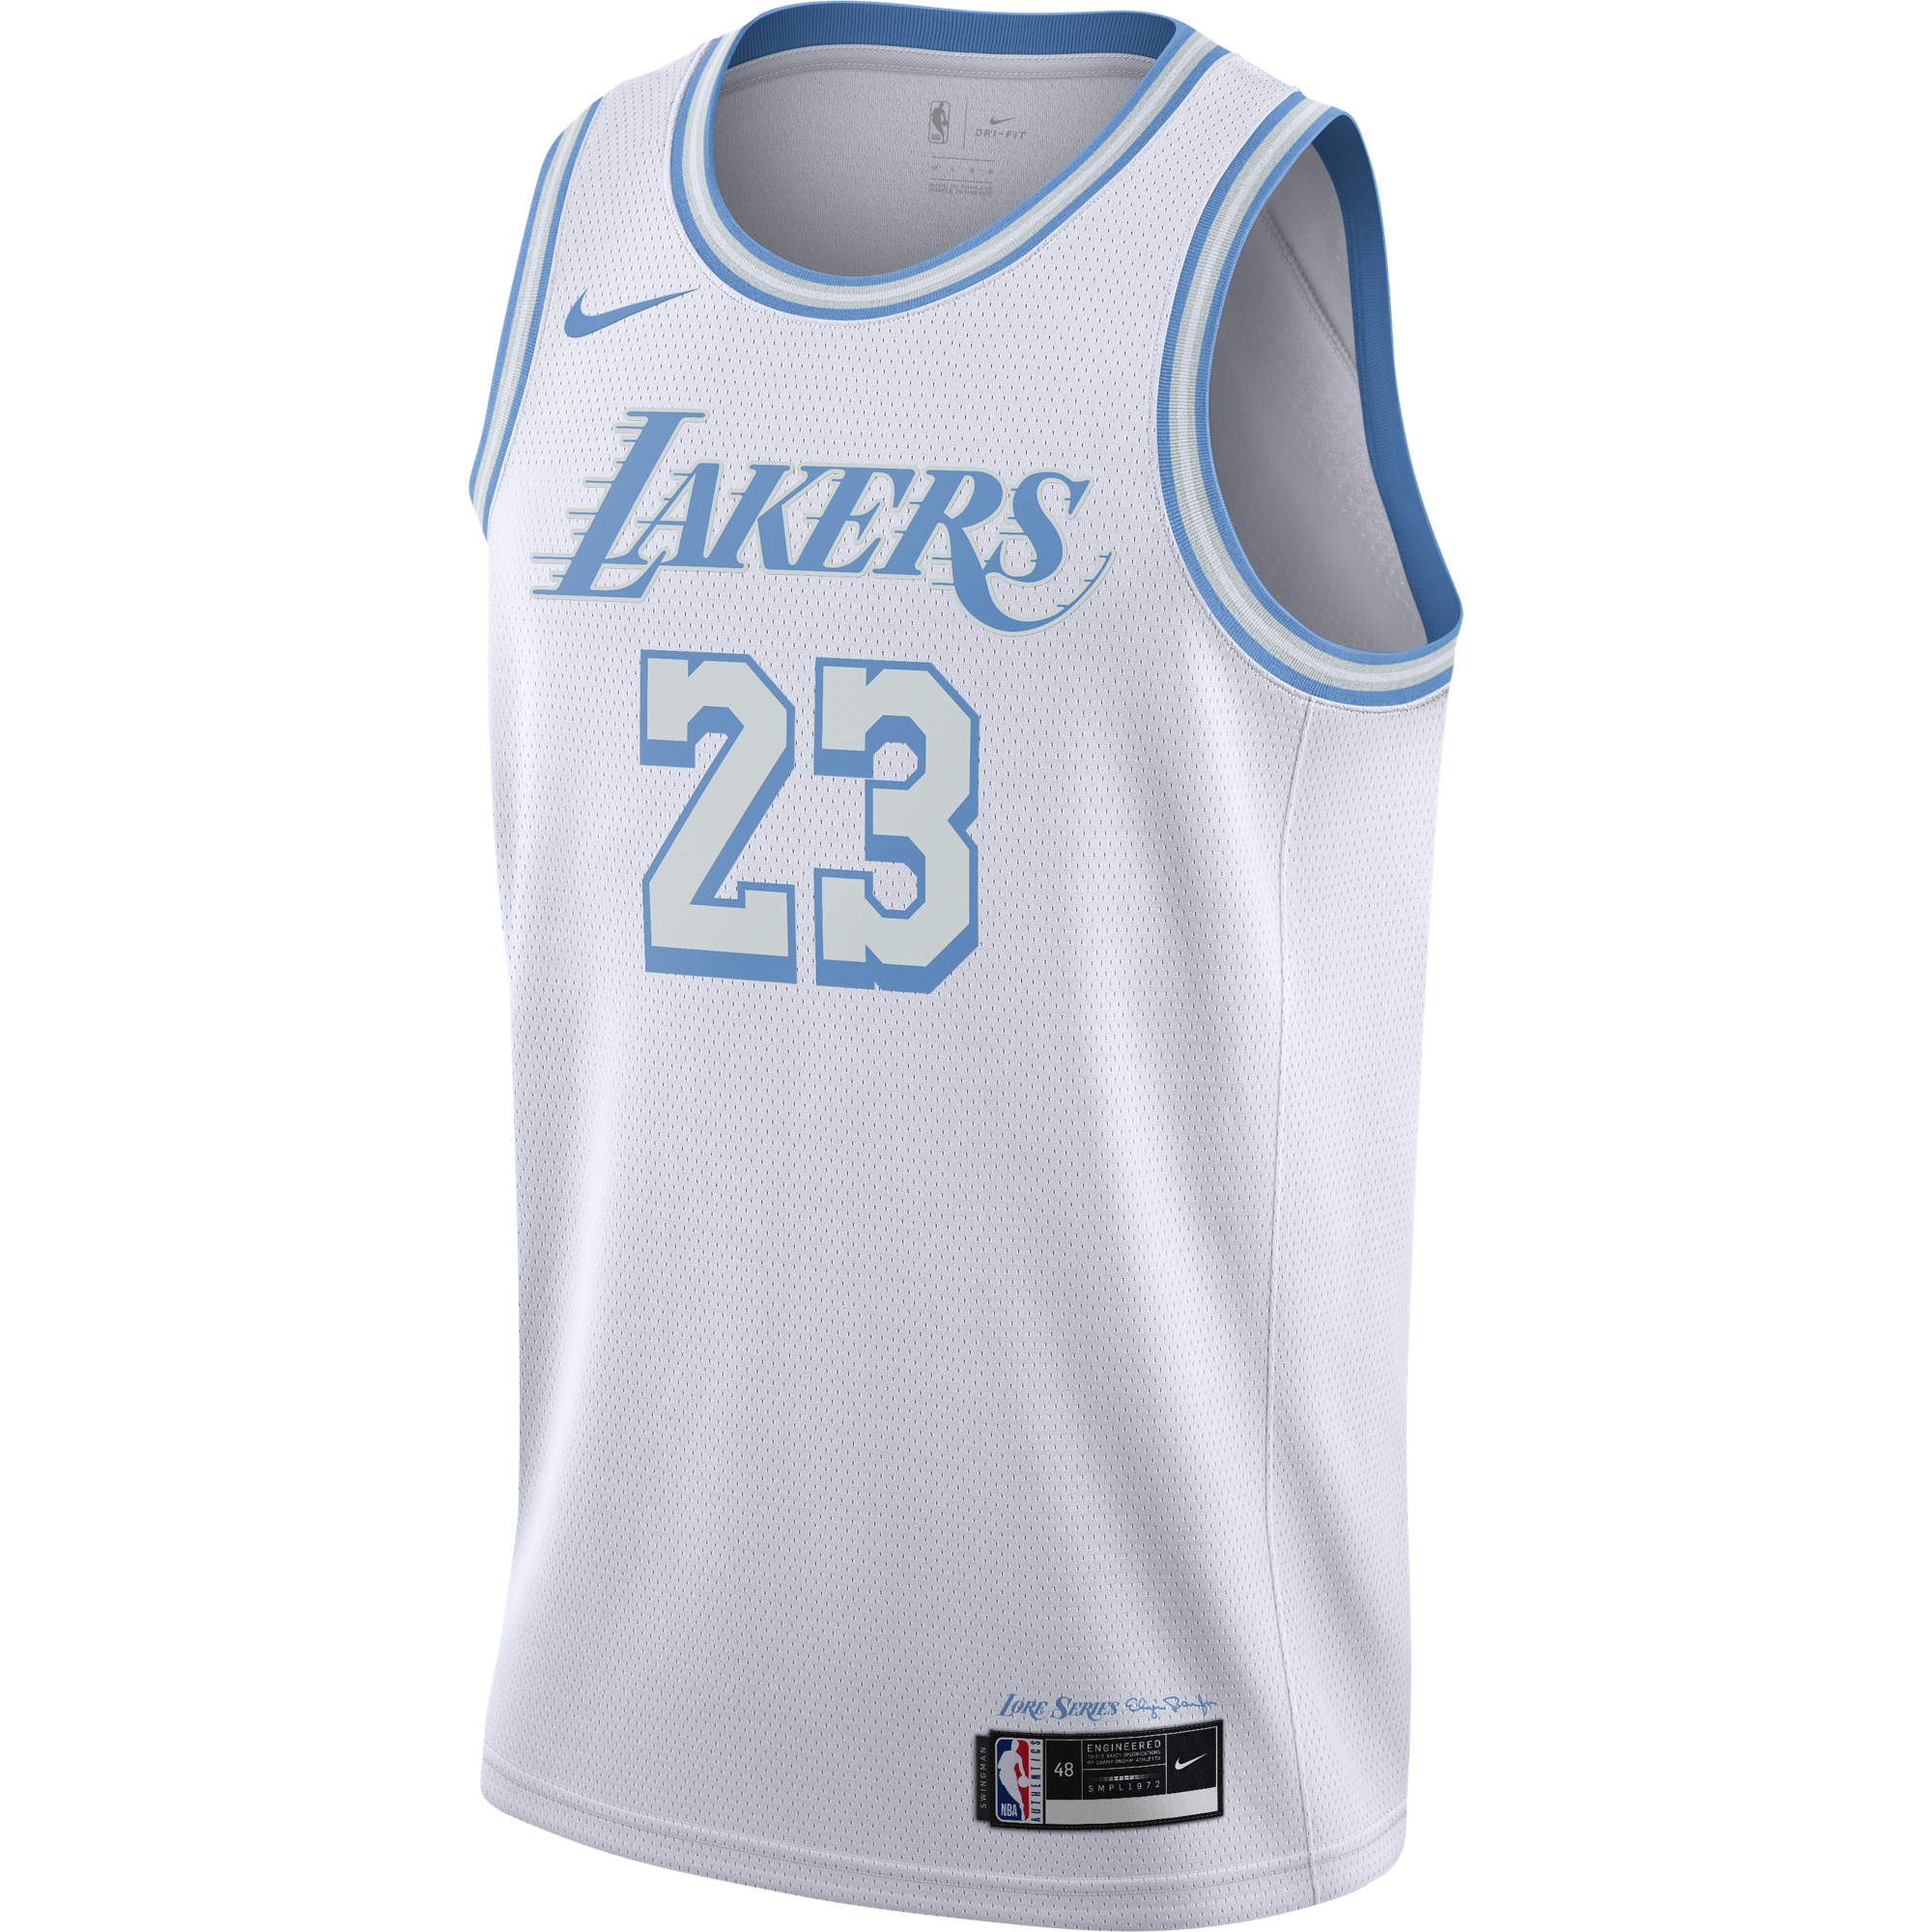 lakers new city jersey